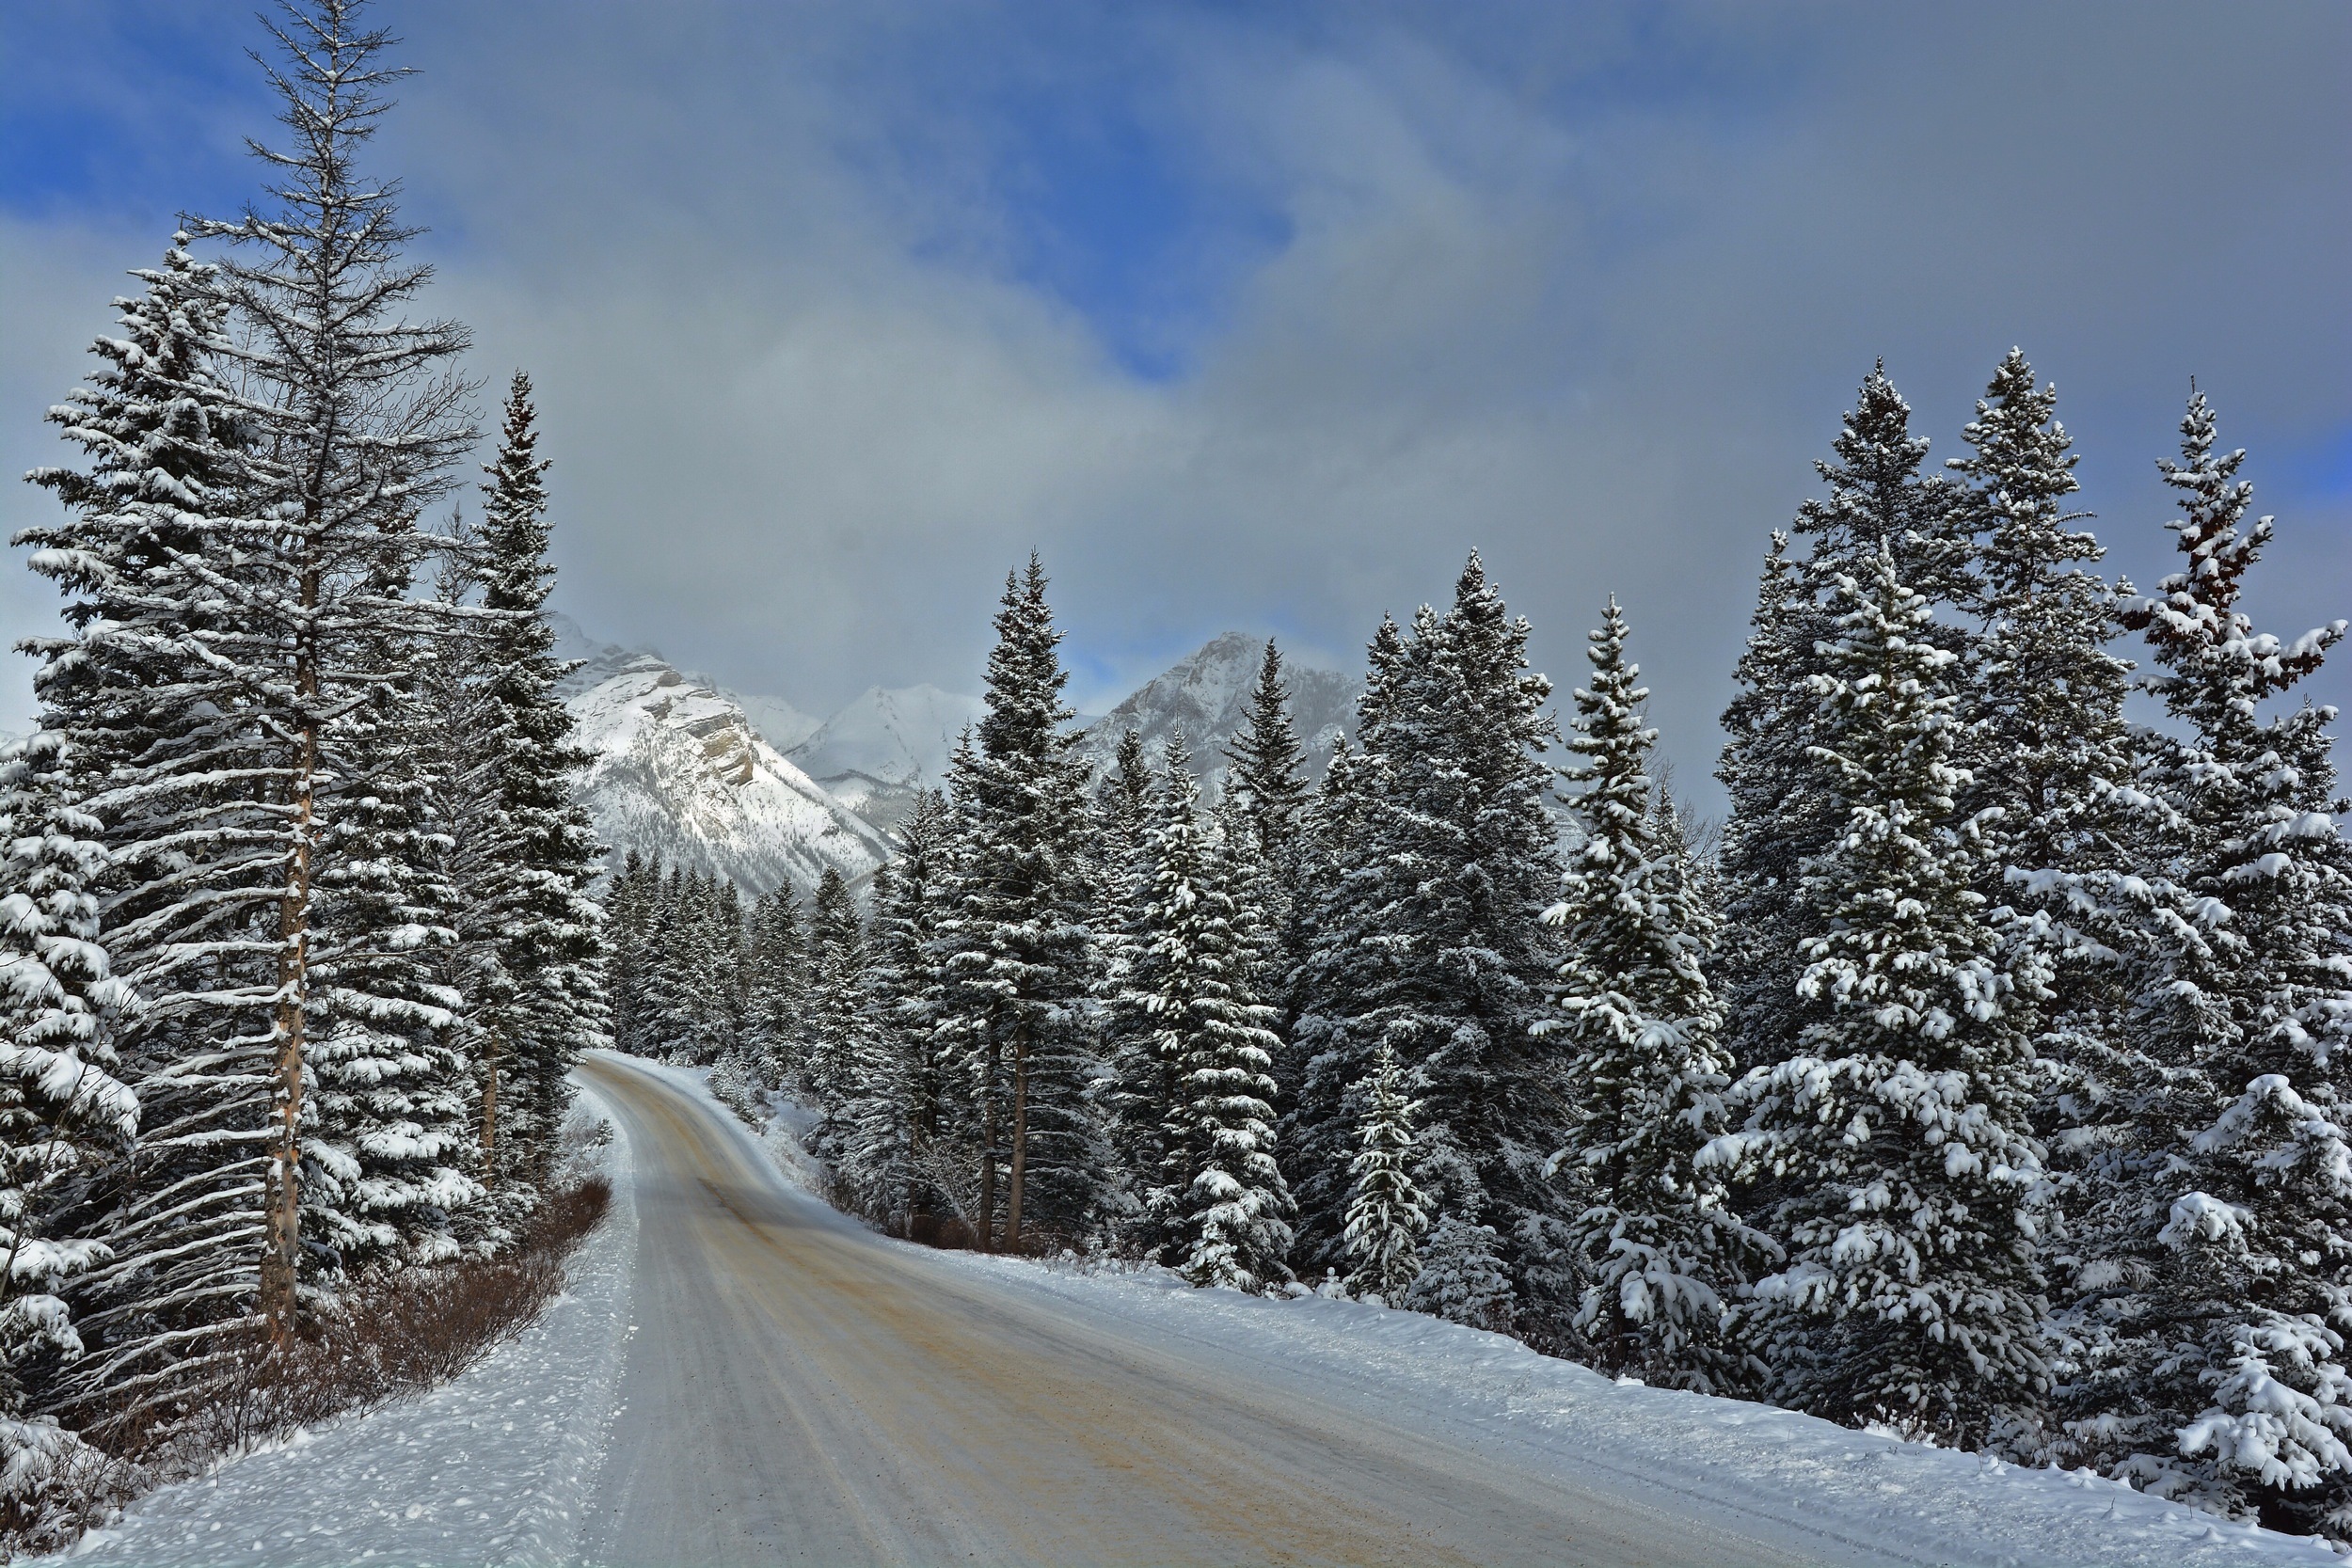 man made, road, banff national park, canada, landscape, mountain, pine, snow, tree, winter Full HD